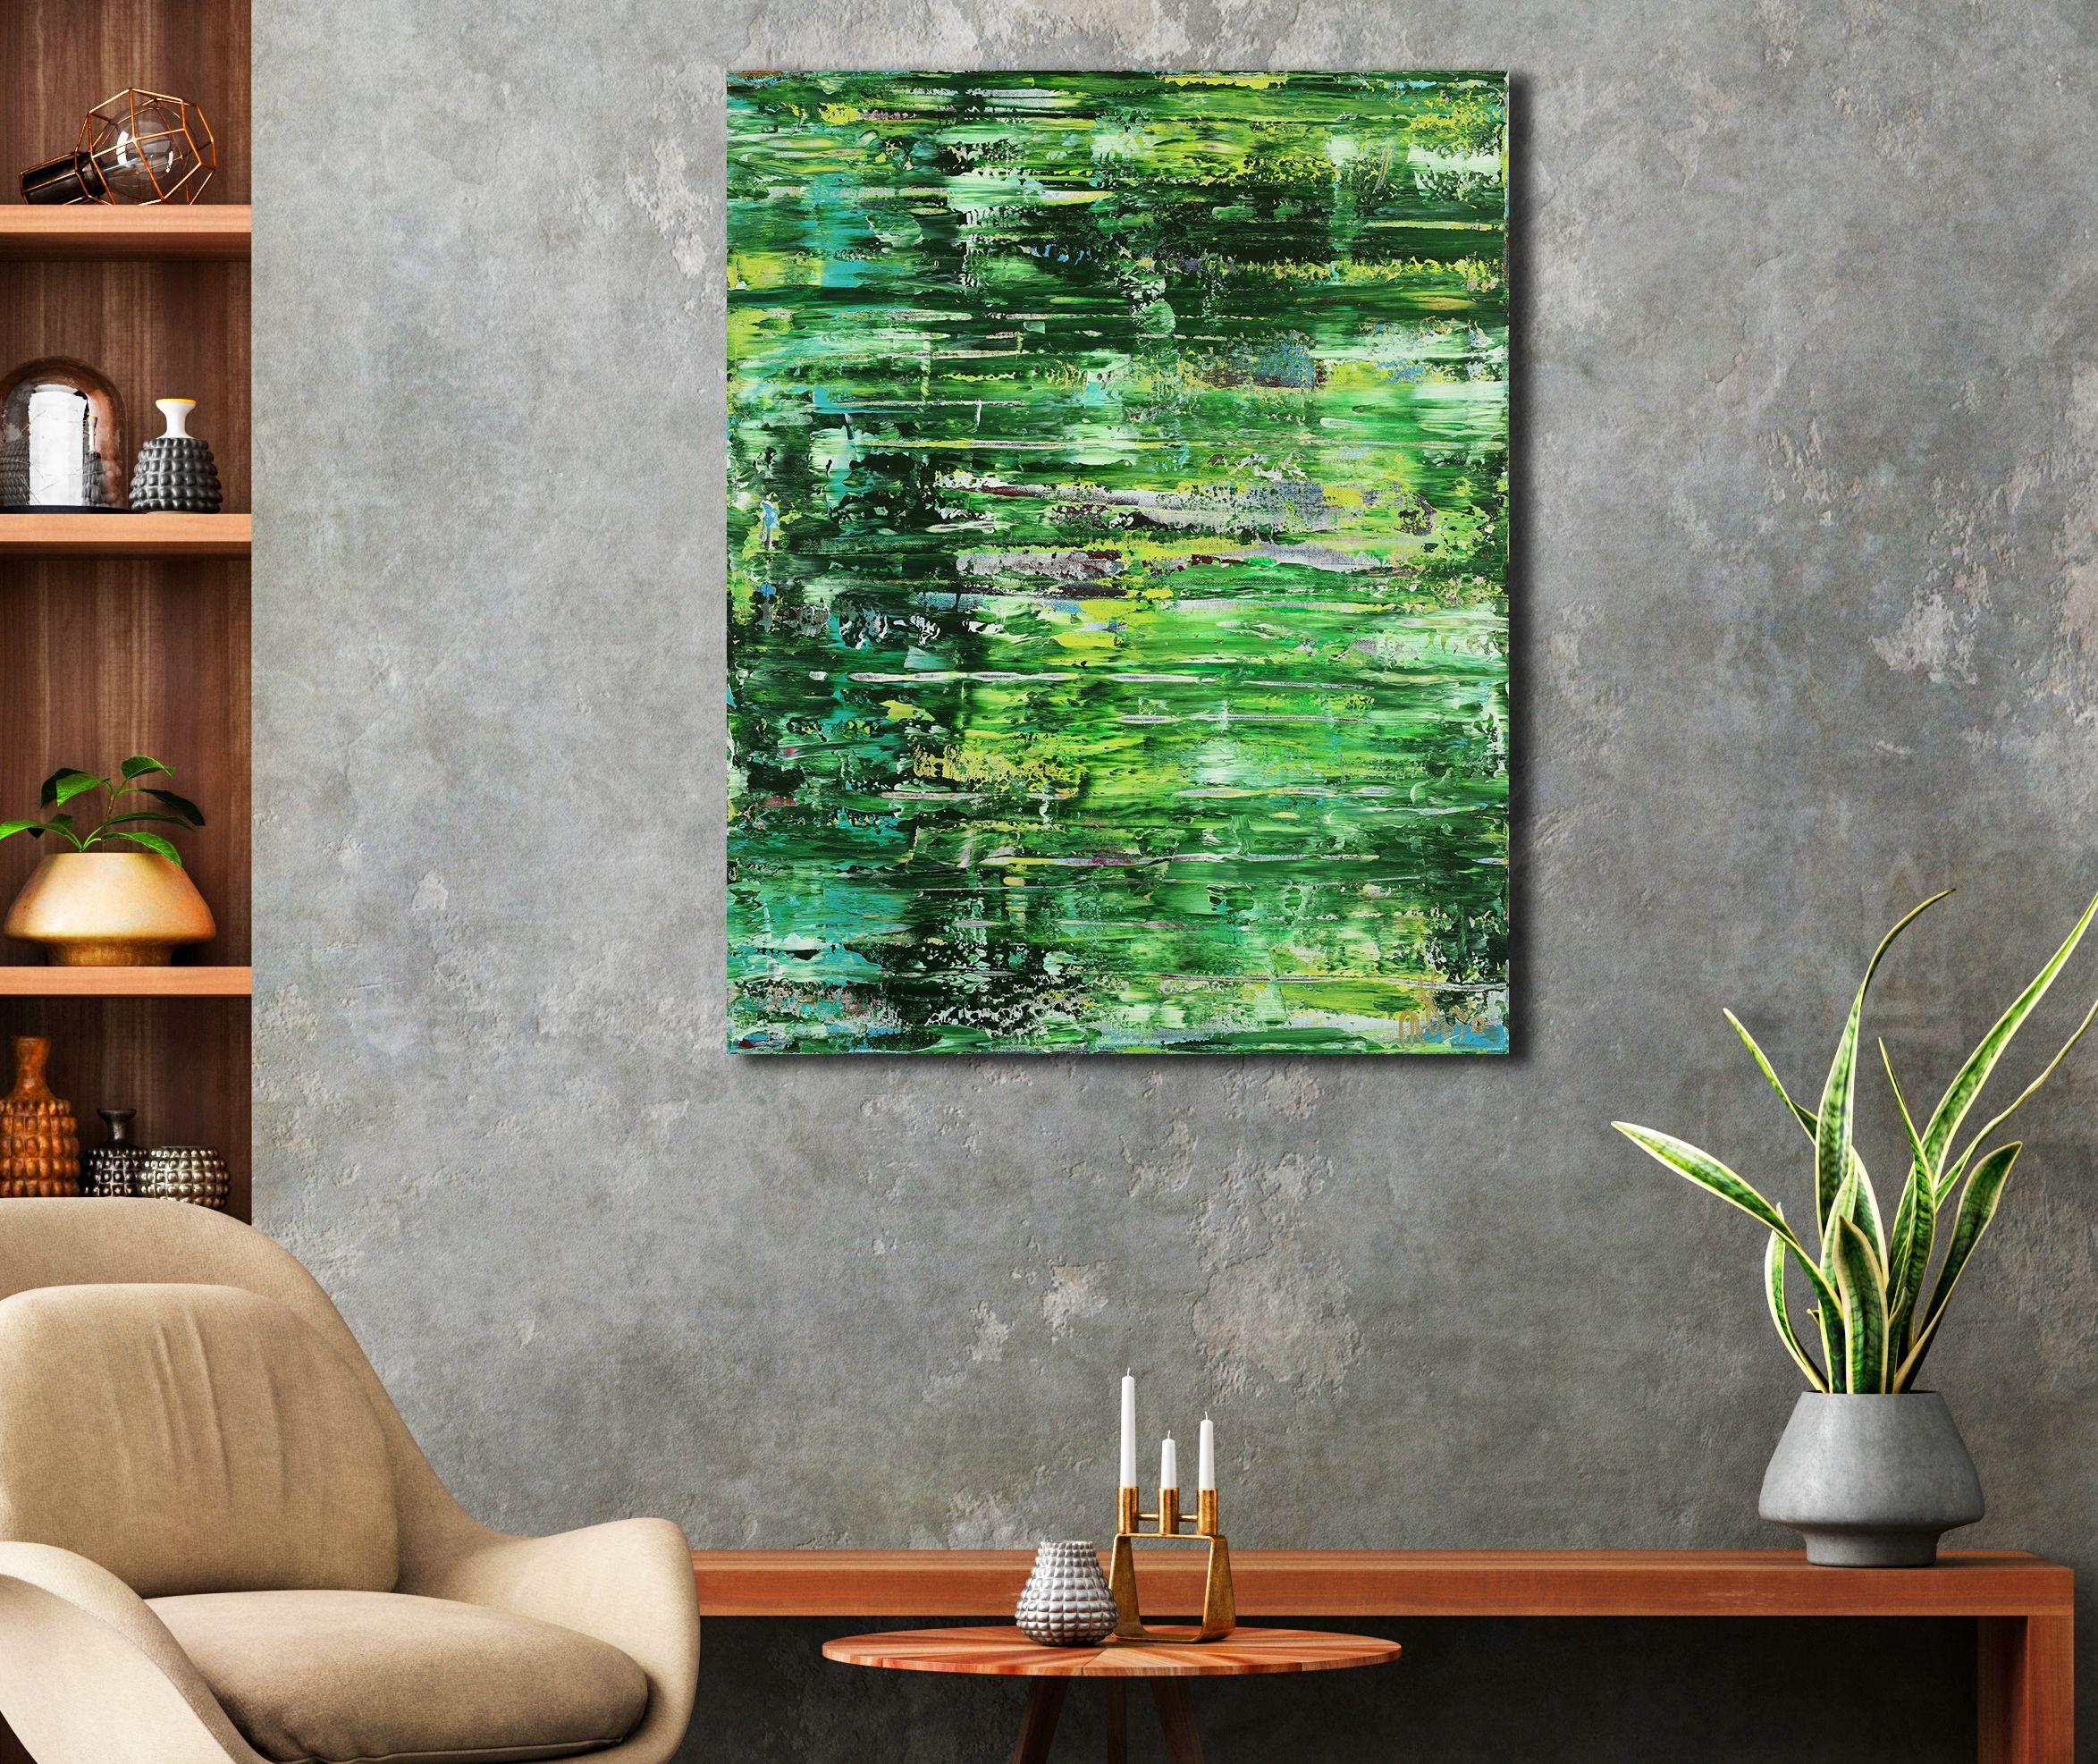 Inspired by nature landscape painting with earthy color blending, contrast and details. Textured with layers of green, blue, beige and brightness!    Inspired by colors of nature with subtle greens and intricate details (see close-ups).    This